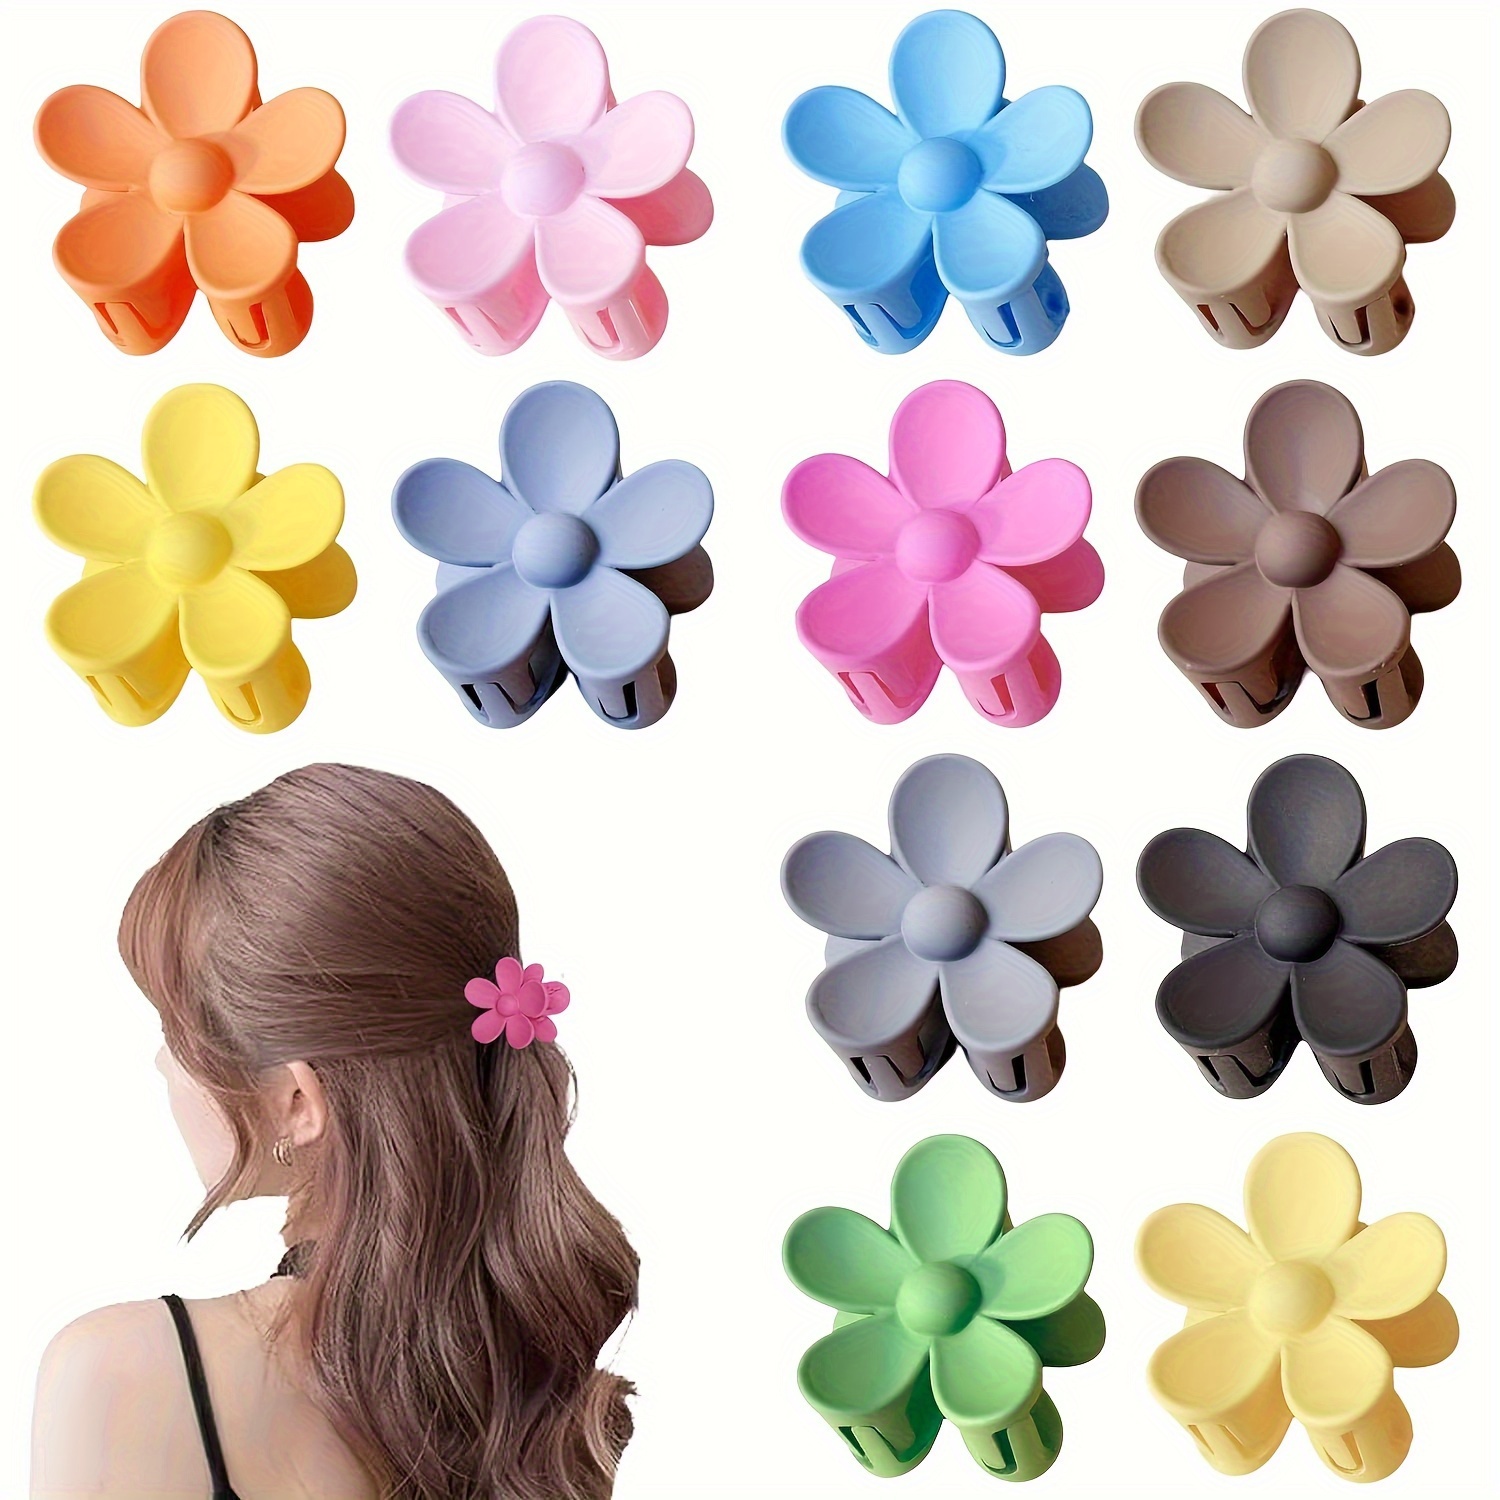 

12pcs Small Flower Hair Claw Clips For Women Girls, Cute Flower Hair Clips For Women Thin/medium Thick Hair, 1.58 Inch Mini Flower Claw Clips Non Slip Matte Tiny Hair Claw Clips